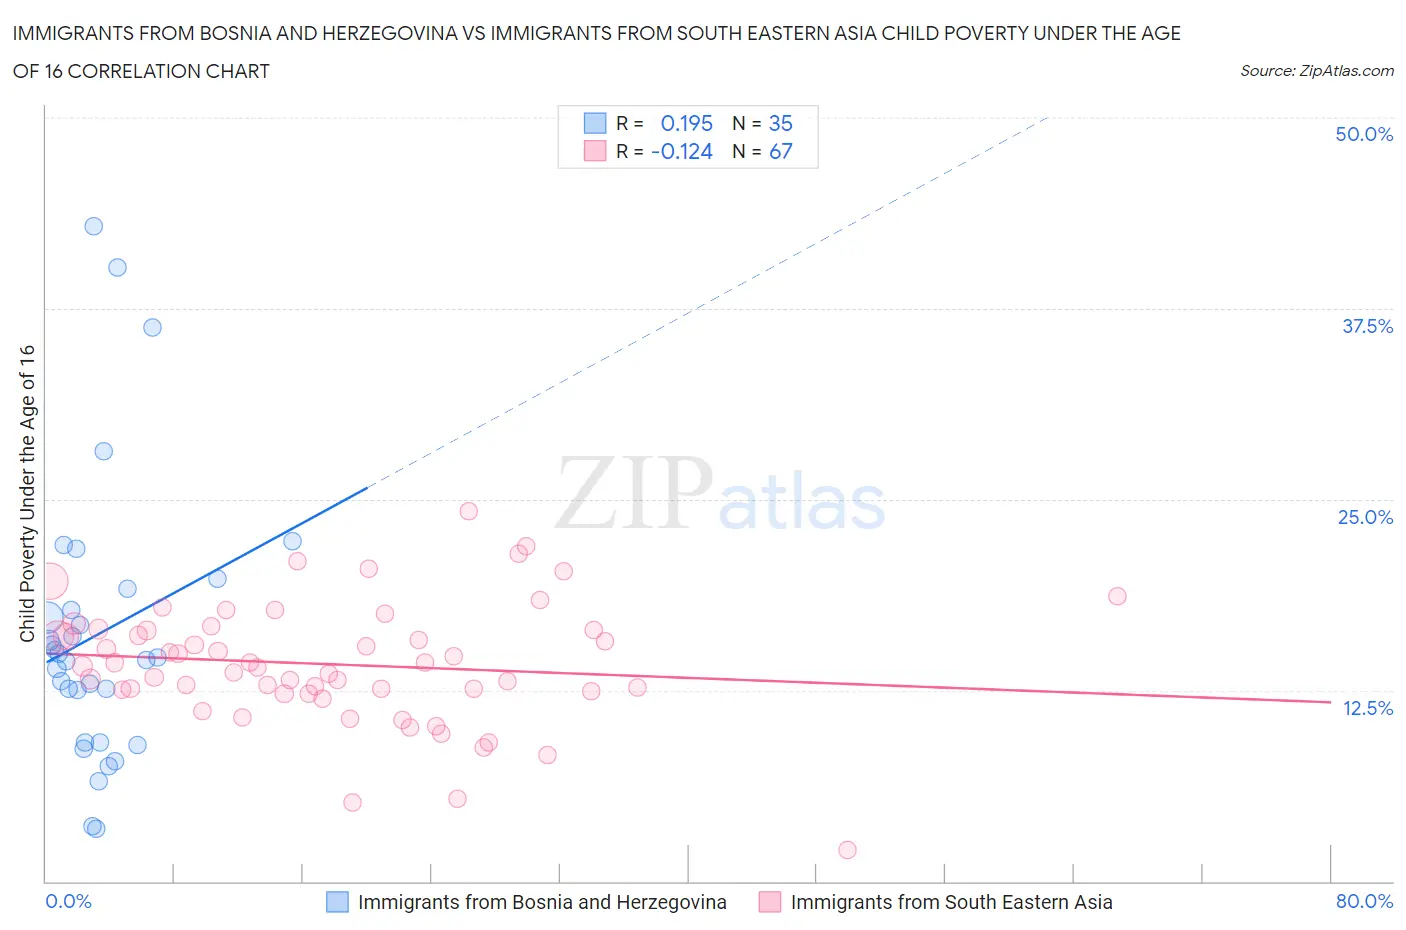 Immigrants from Bosnia and Herzegovina vs Immigrants from South Eastern Asia Child Poverty Under the Age of 16